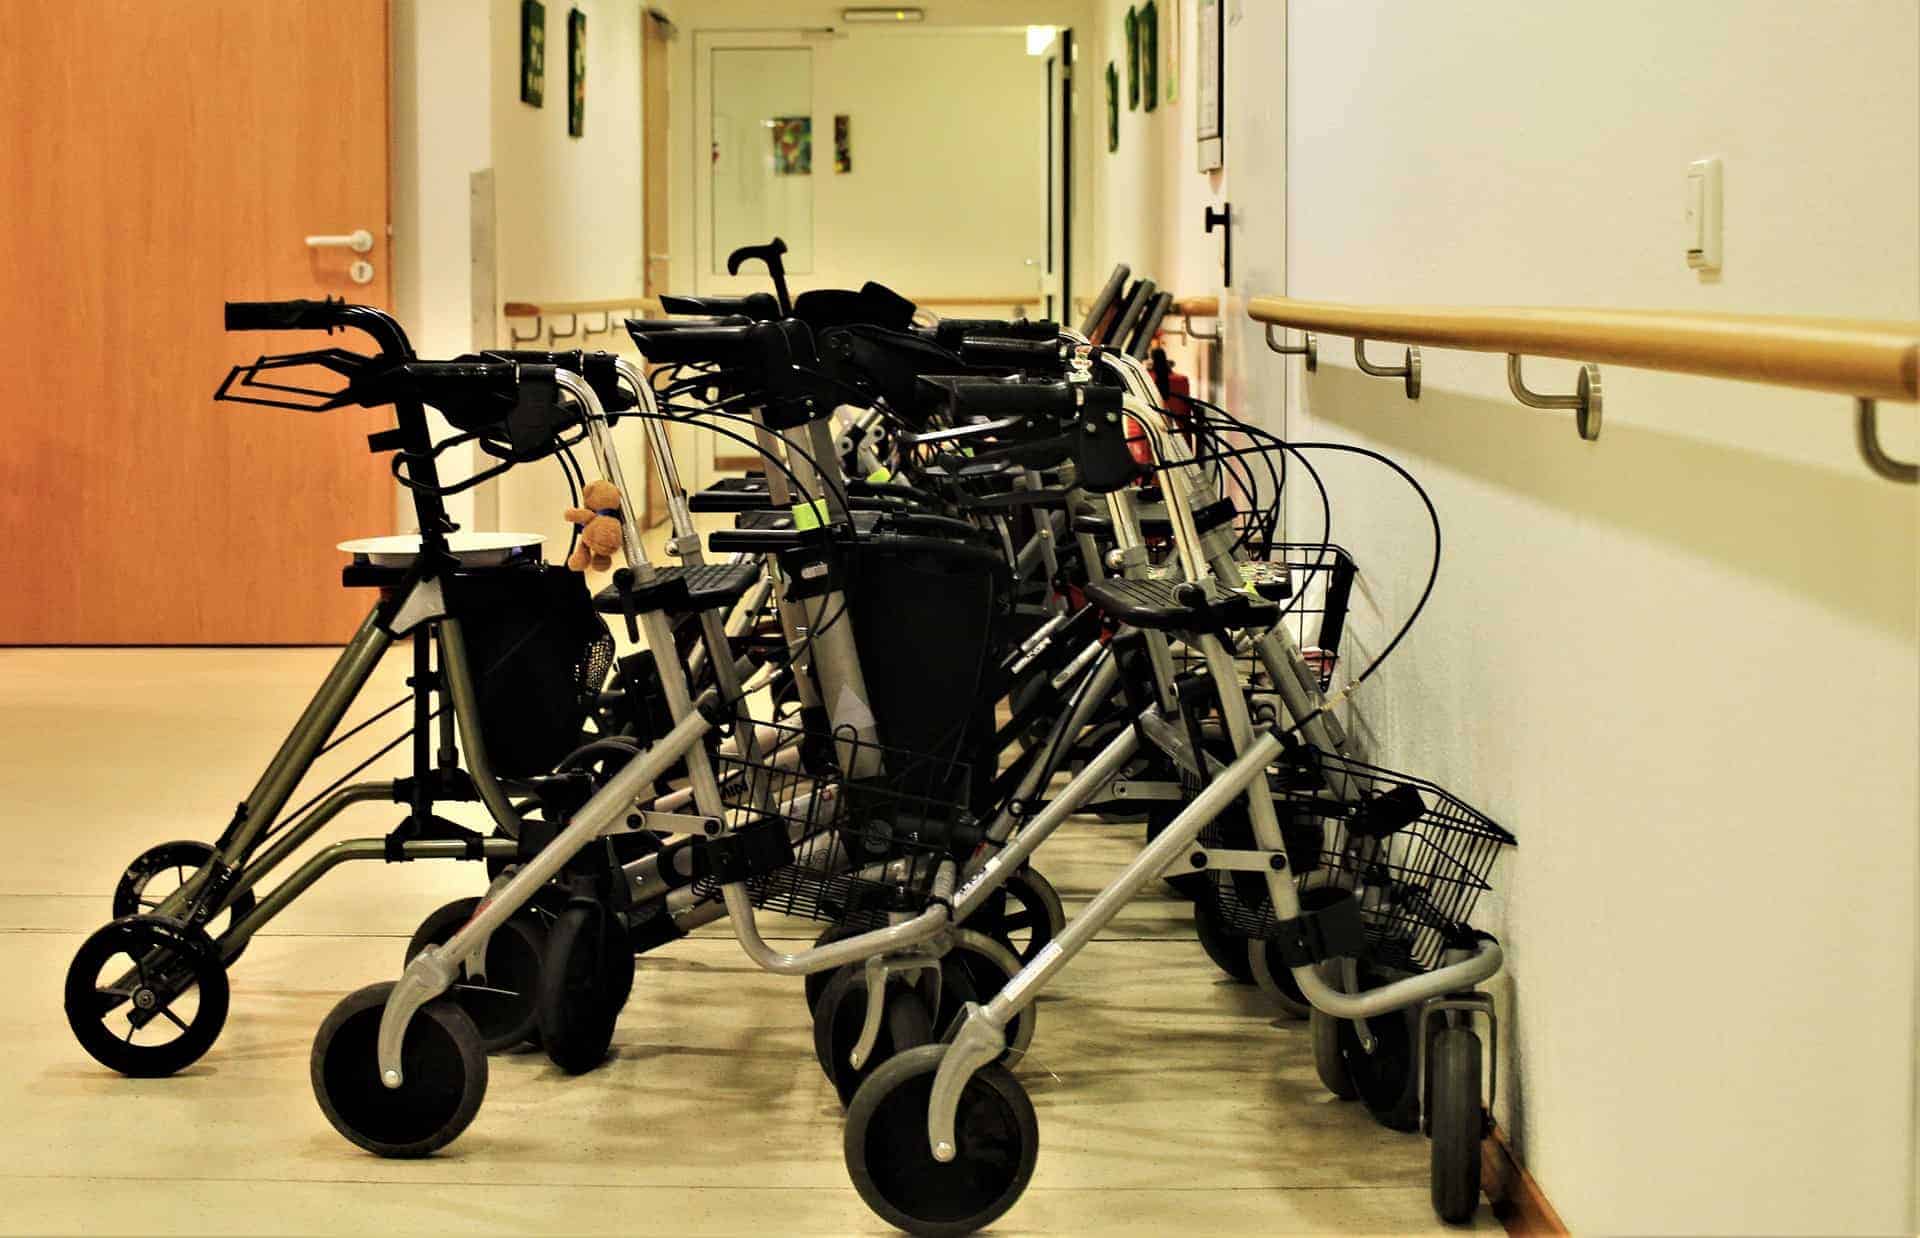 A collection of walking aids parked along a hallway, hinting at the presence of a rehabilitation center or elderly care facility following a reluctant parent's nursing home admission.